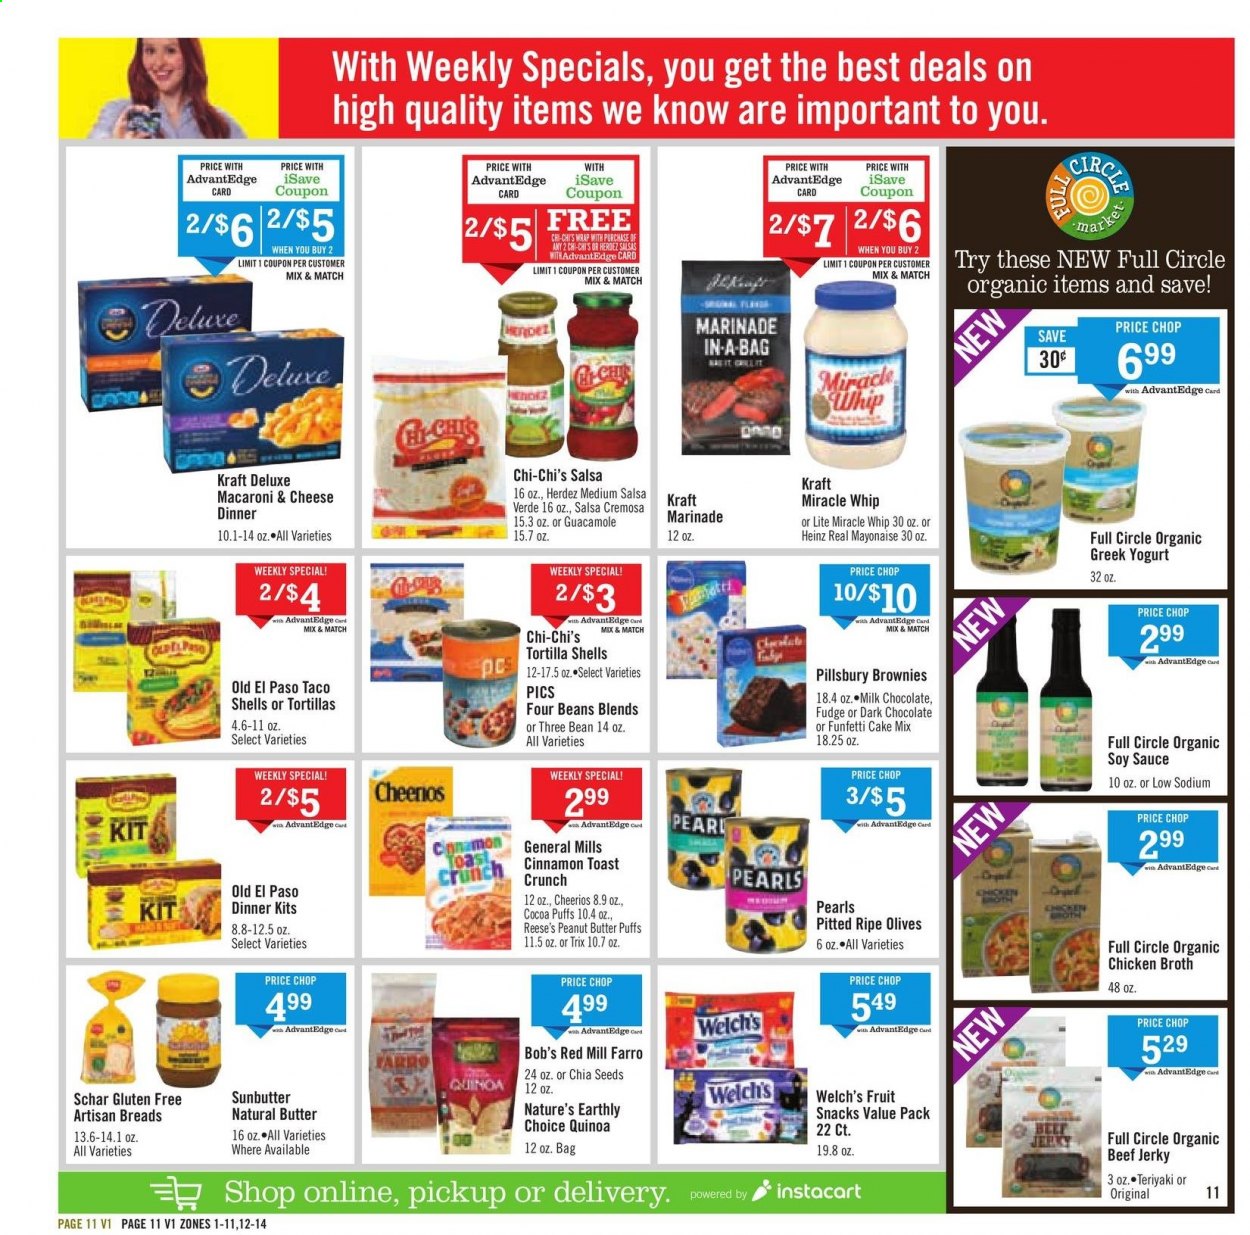 thumbnail - Price Chopper Flyer - 05/02/2021 - 05/08/2021 - Sales products - tortillas, Old El Paso, puffs, brownies, cake mix, beans, Welch's, macaroni & cheese, sauce, Pillsbury, dinner kit, Kraft®, beef jerky, jerky, guacamole, greek yoghurt, yoghurt, Miracle Whip, Reese's, fudge, milk chocolate, chocolate, fruit snack, chicken broth, broth, Heinz, olives, Cheerios, Trix, quinoa, chia seeds, cinnamon, soy sauce, salsa, marinade, peanut butter. Page 11.